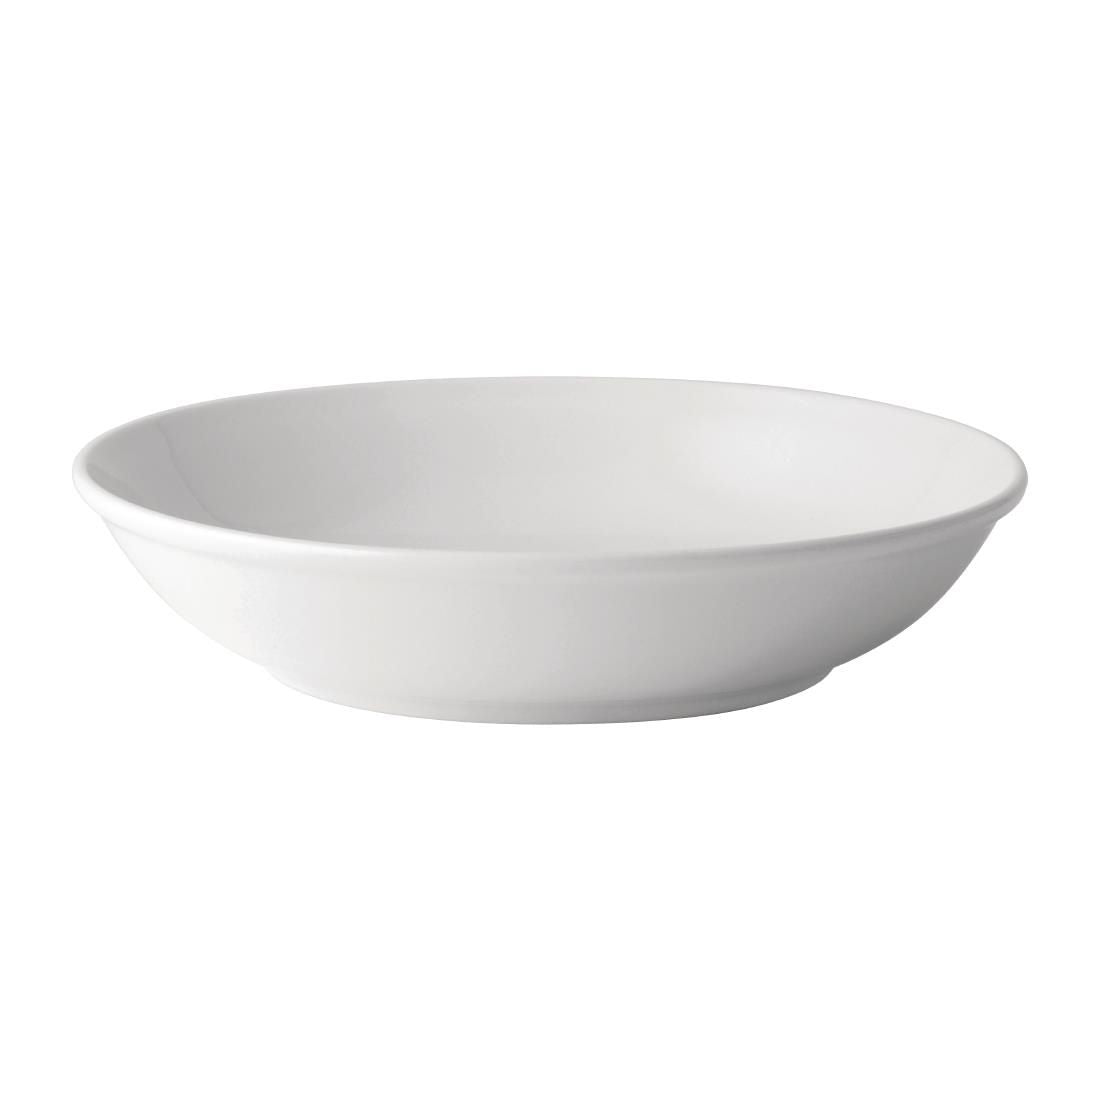 DY331 Utopia Pure White Pasta Bowls 260mm (Pack of 18)